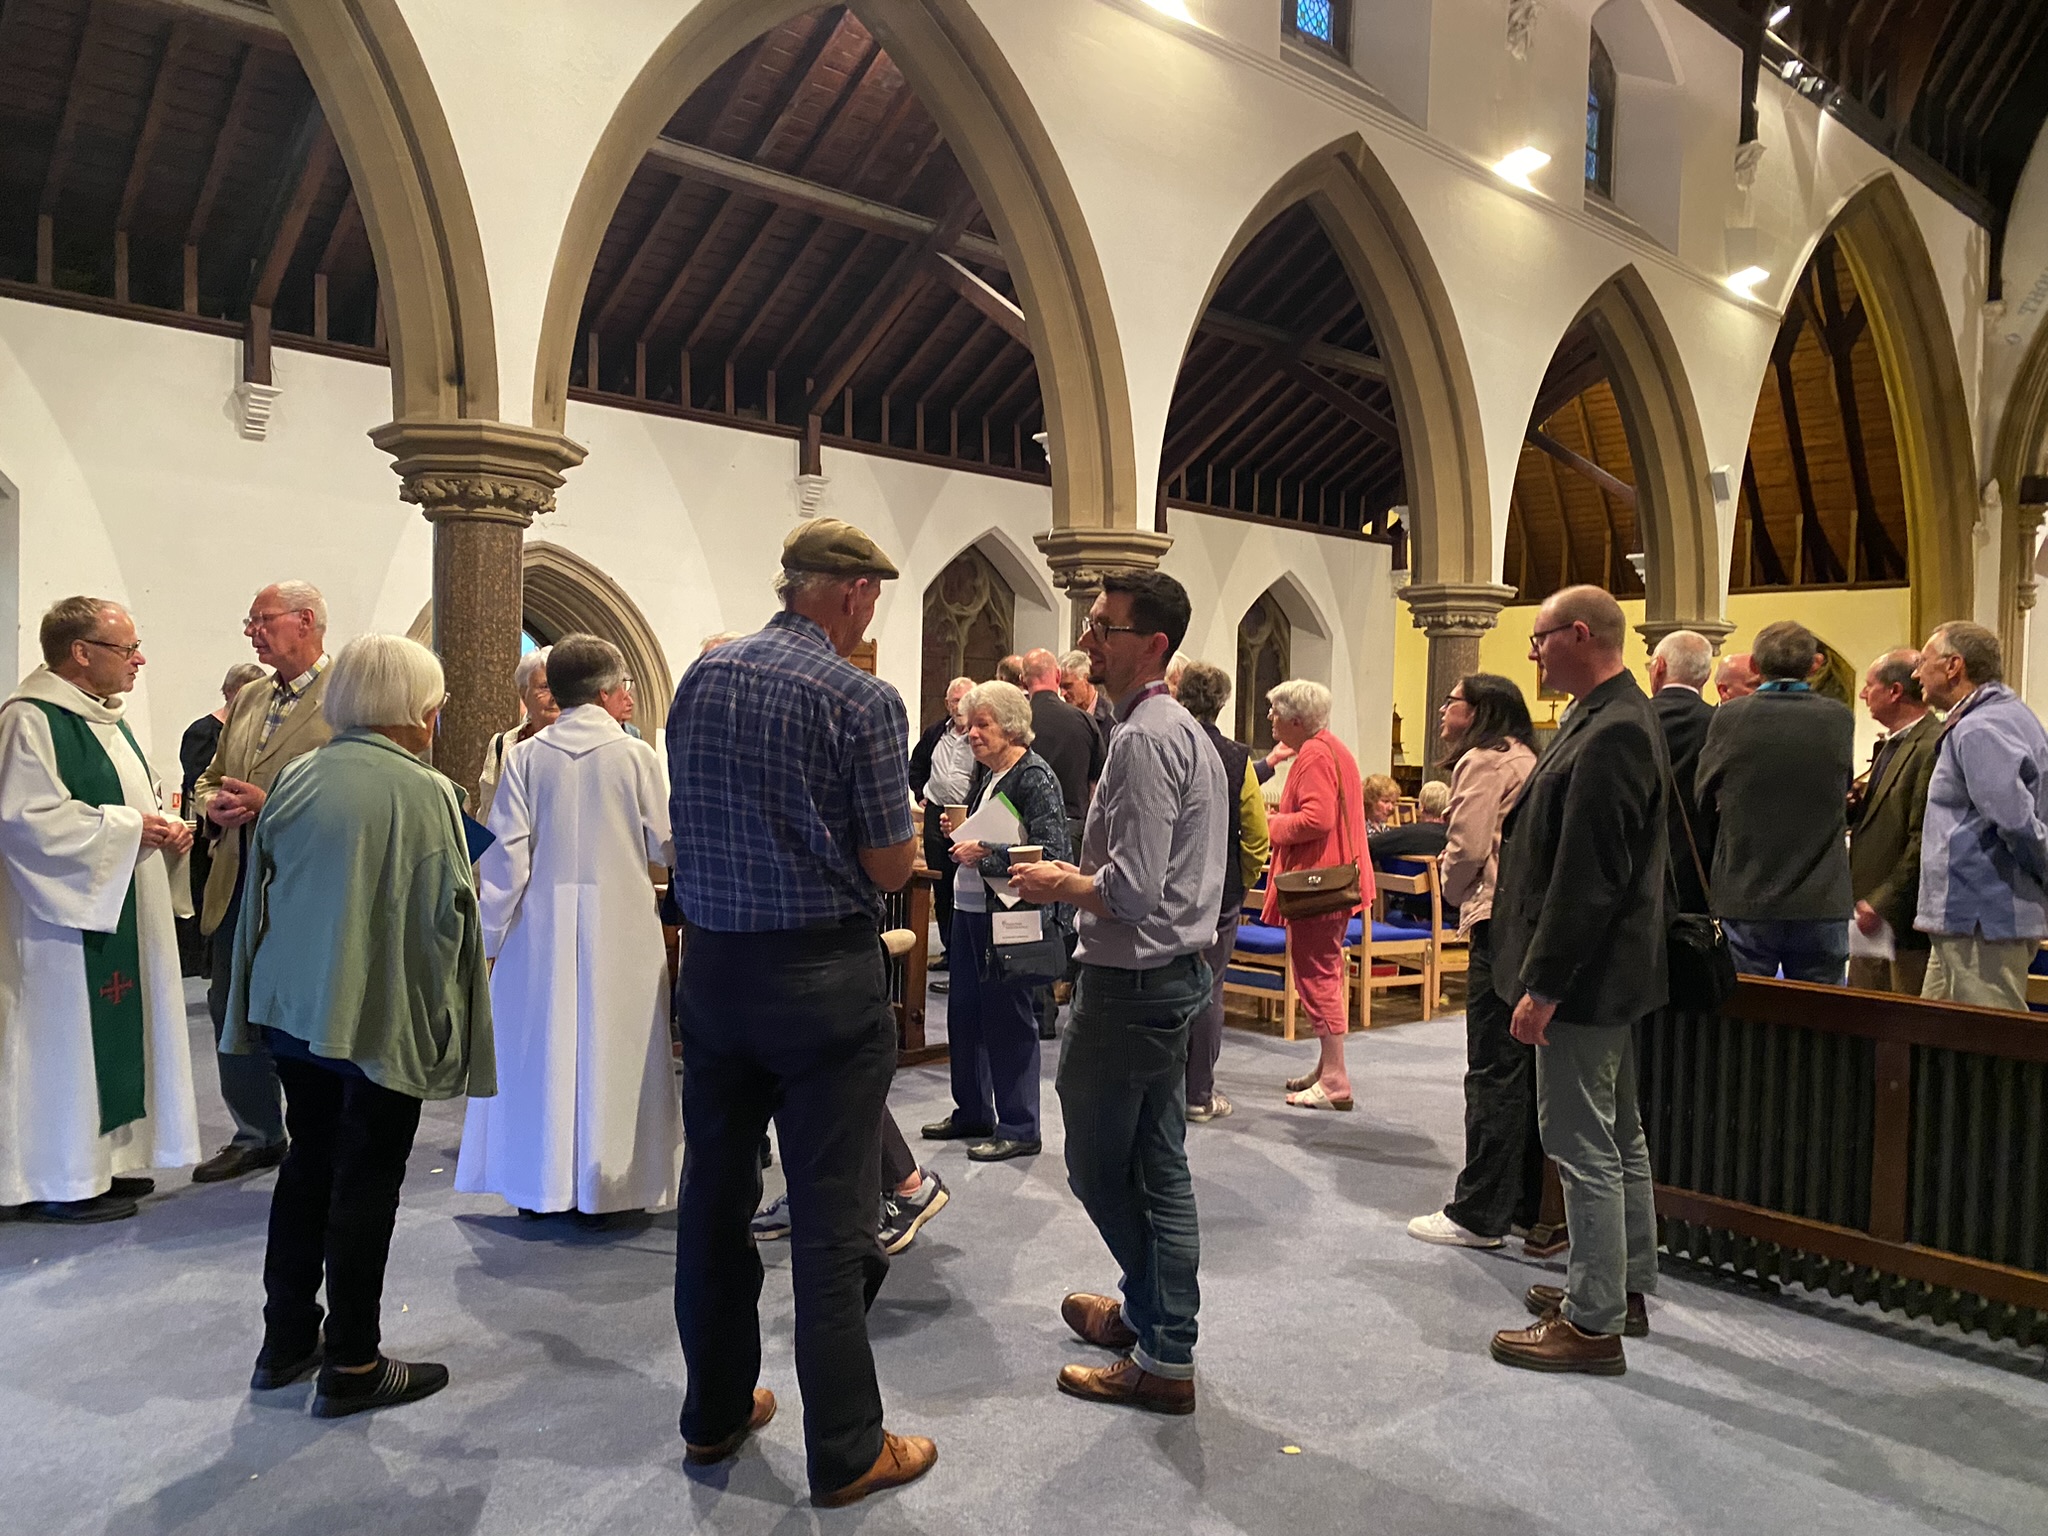 People chatting informally at the celebration of ministries in st Peter, bengeworth